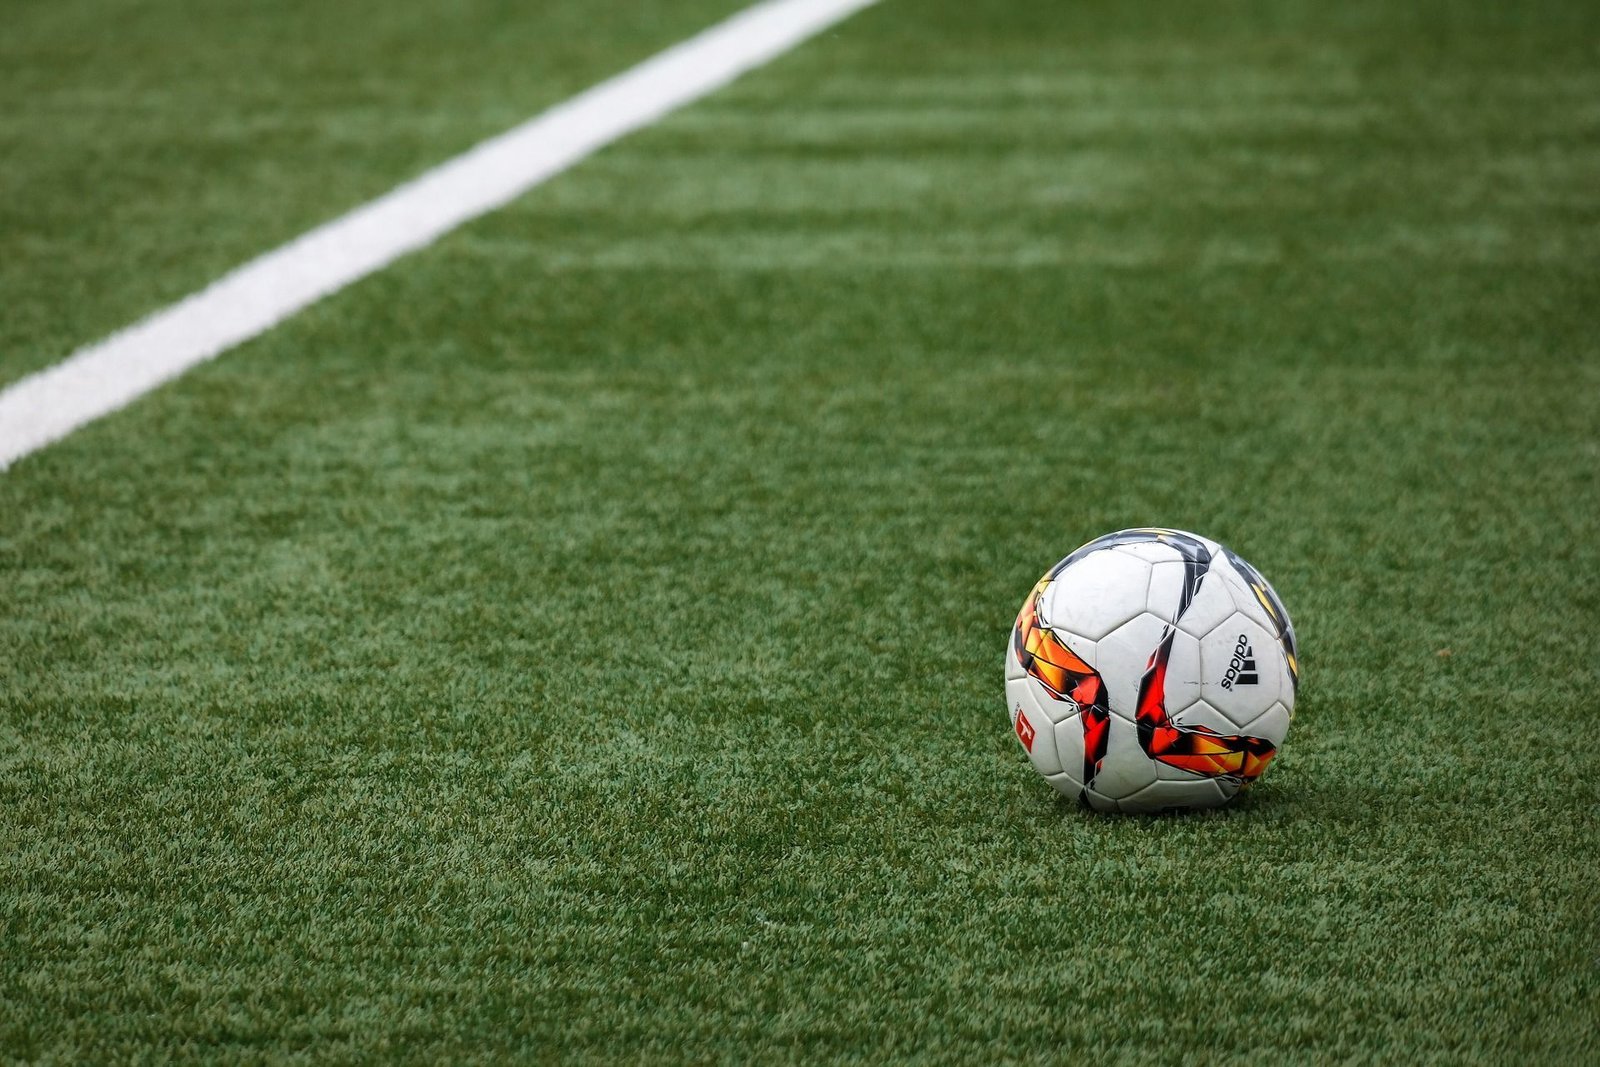 A soccer ball with colorful patterns sits on a green artificial turf field near a white sideline, ready for play. The image focuses on the ball and the clear, bright pet-friendly turf surface.